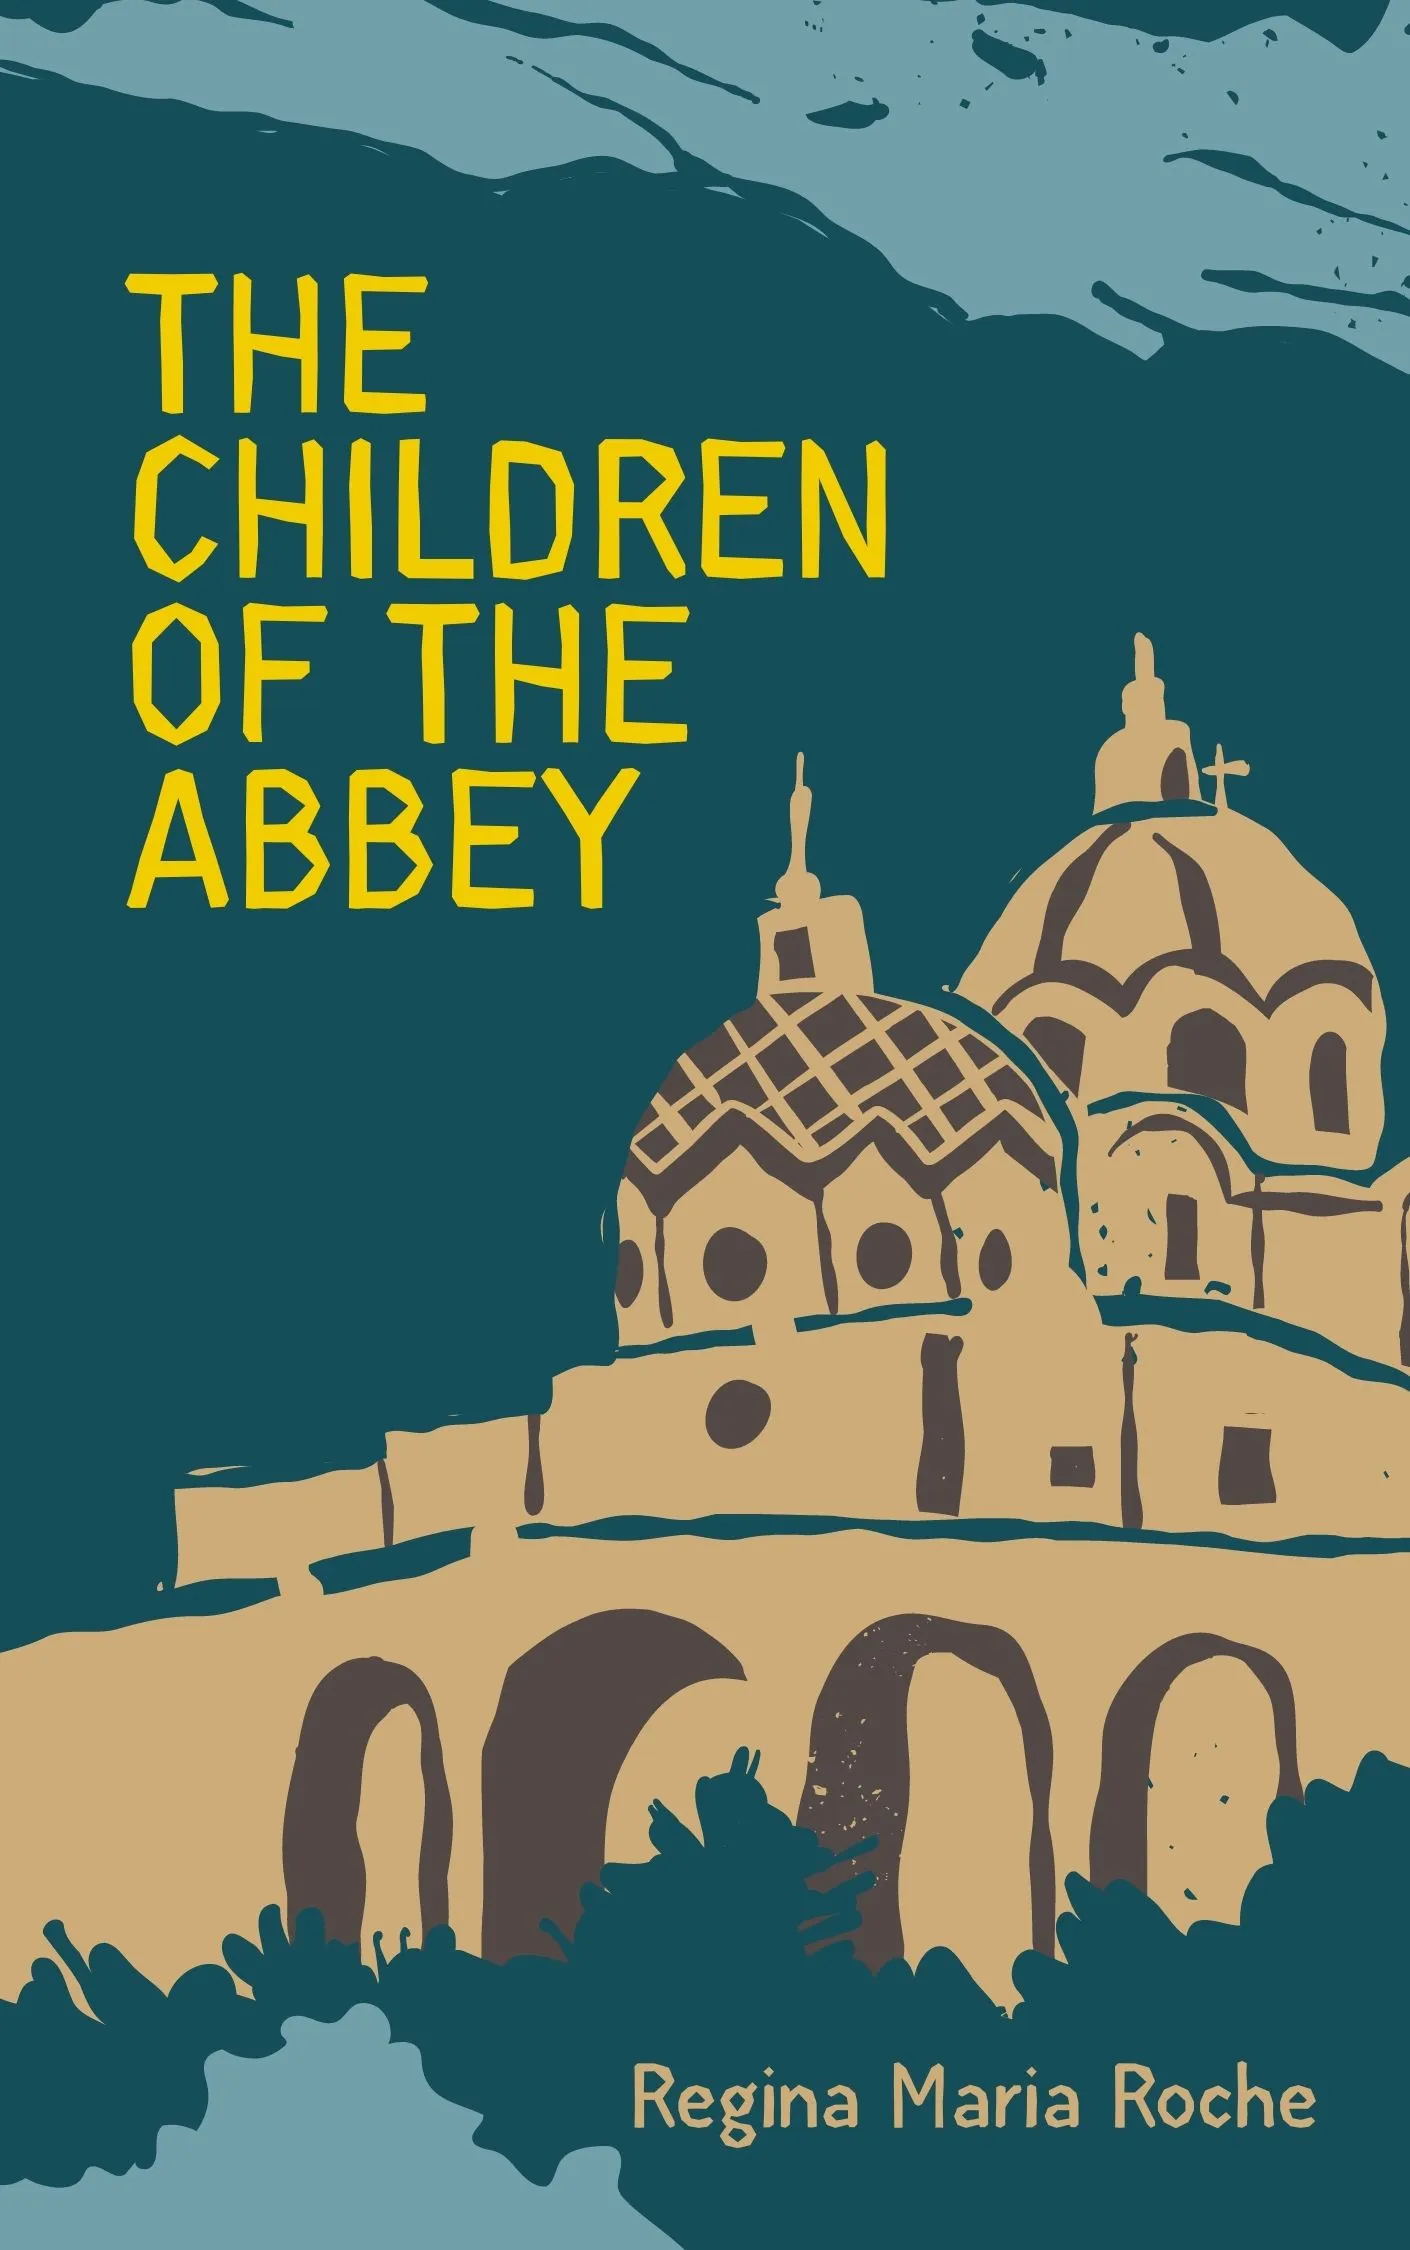 The Children of the Abbey by Regina Maria Roche Audiobook